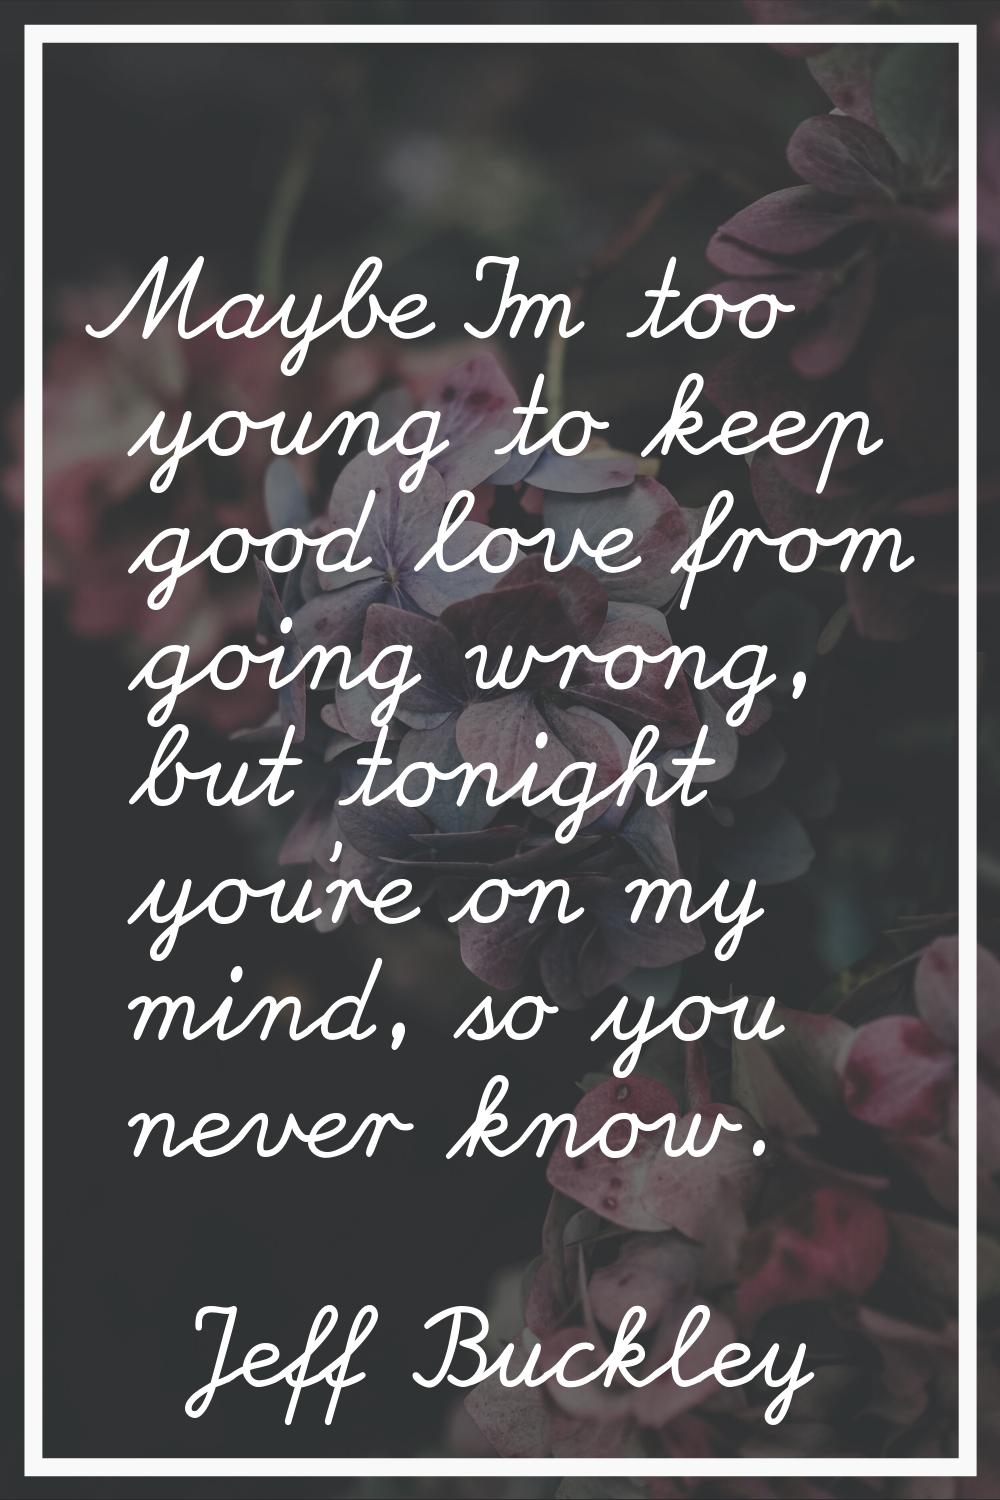 Maybe I'm too young to keep good love from going wrong, but tonight you're on my mind, so you never